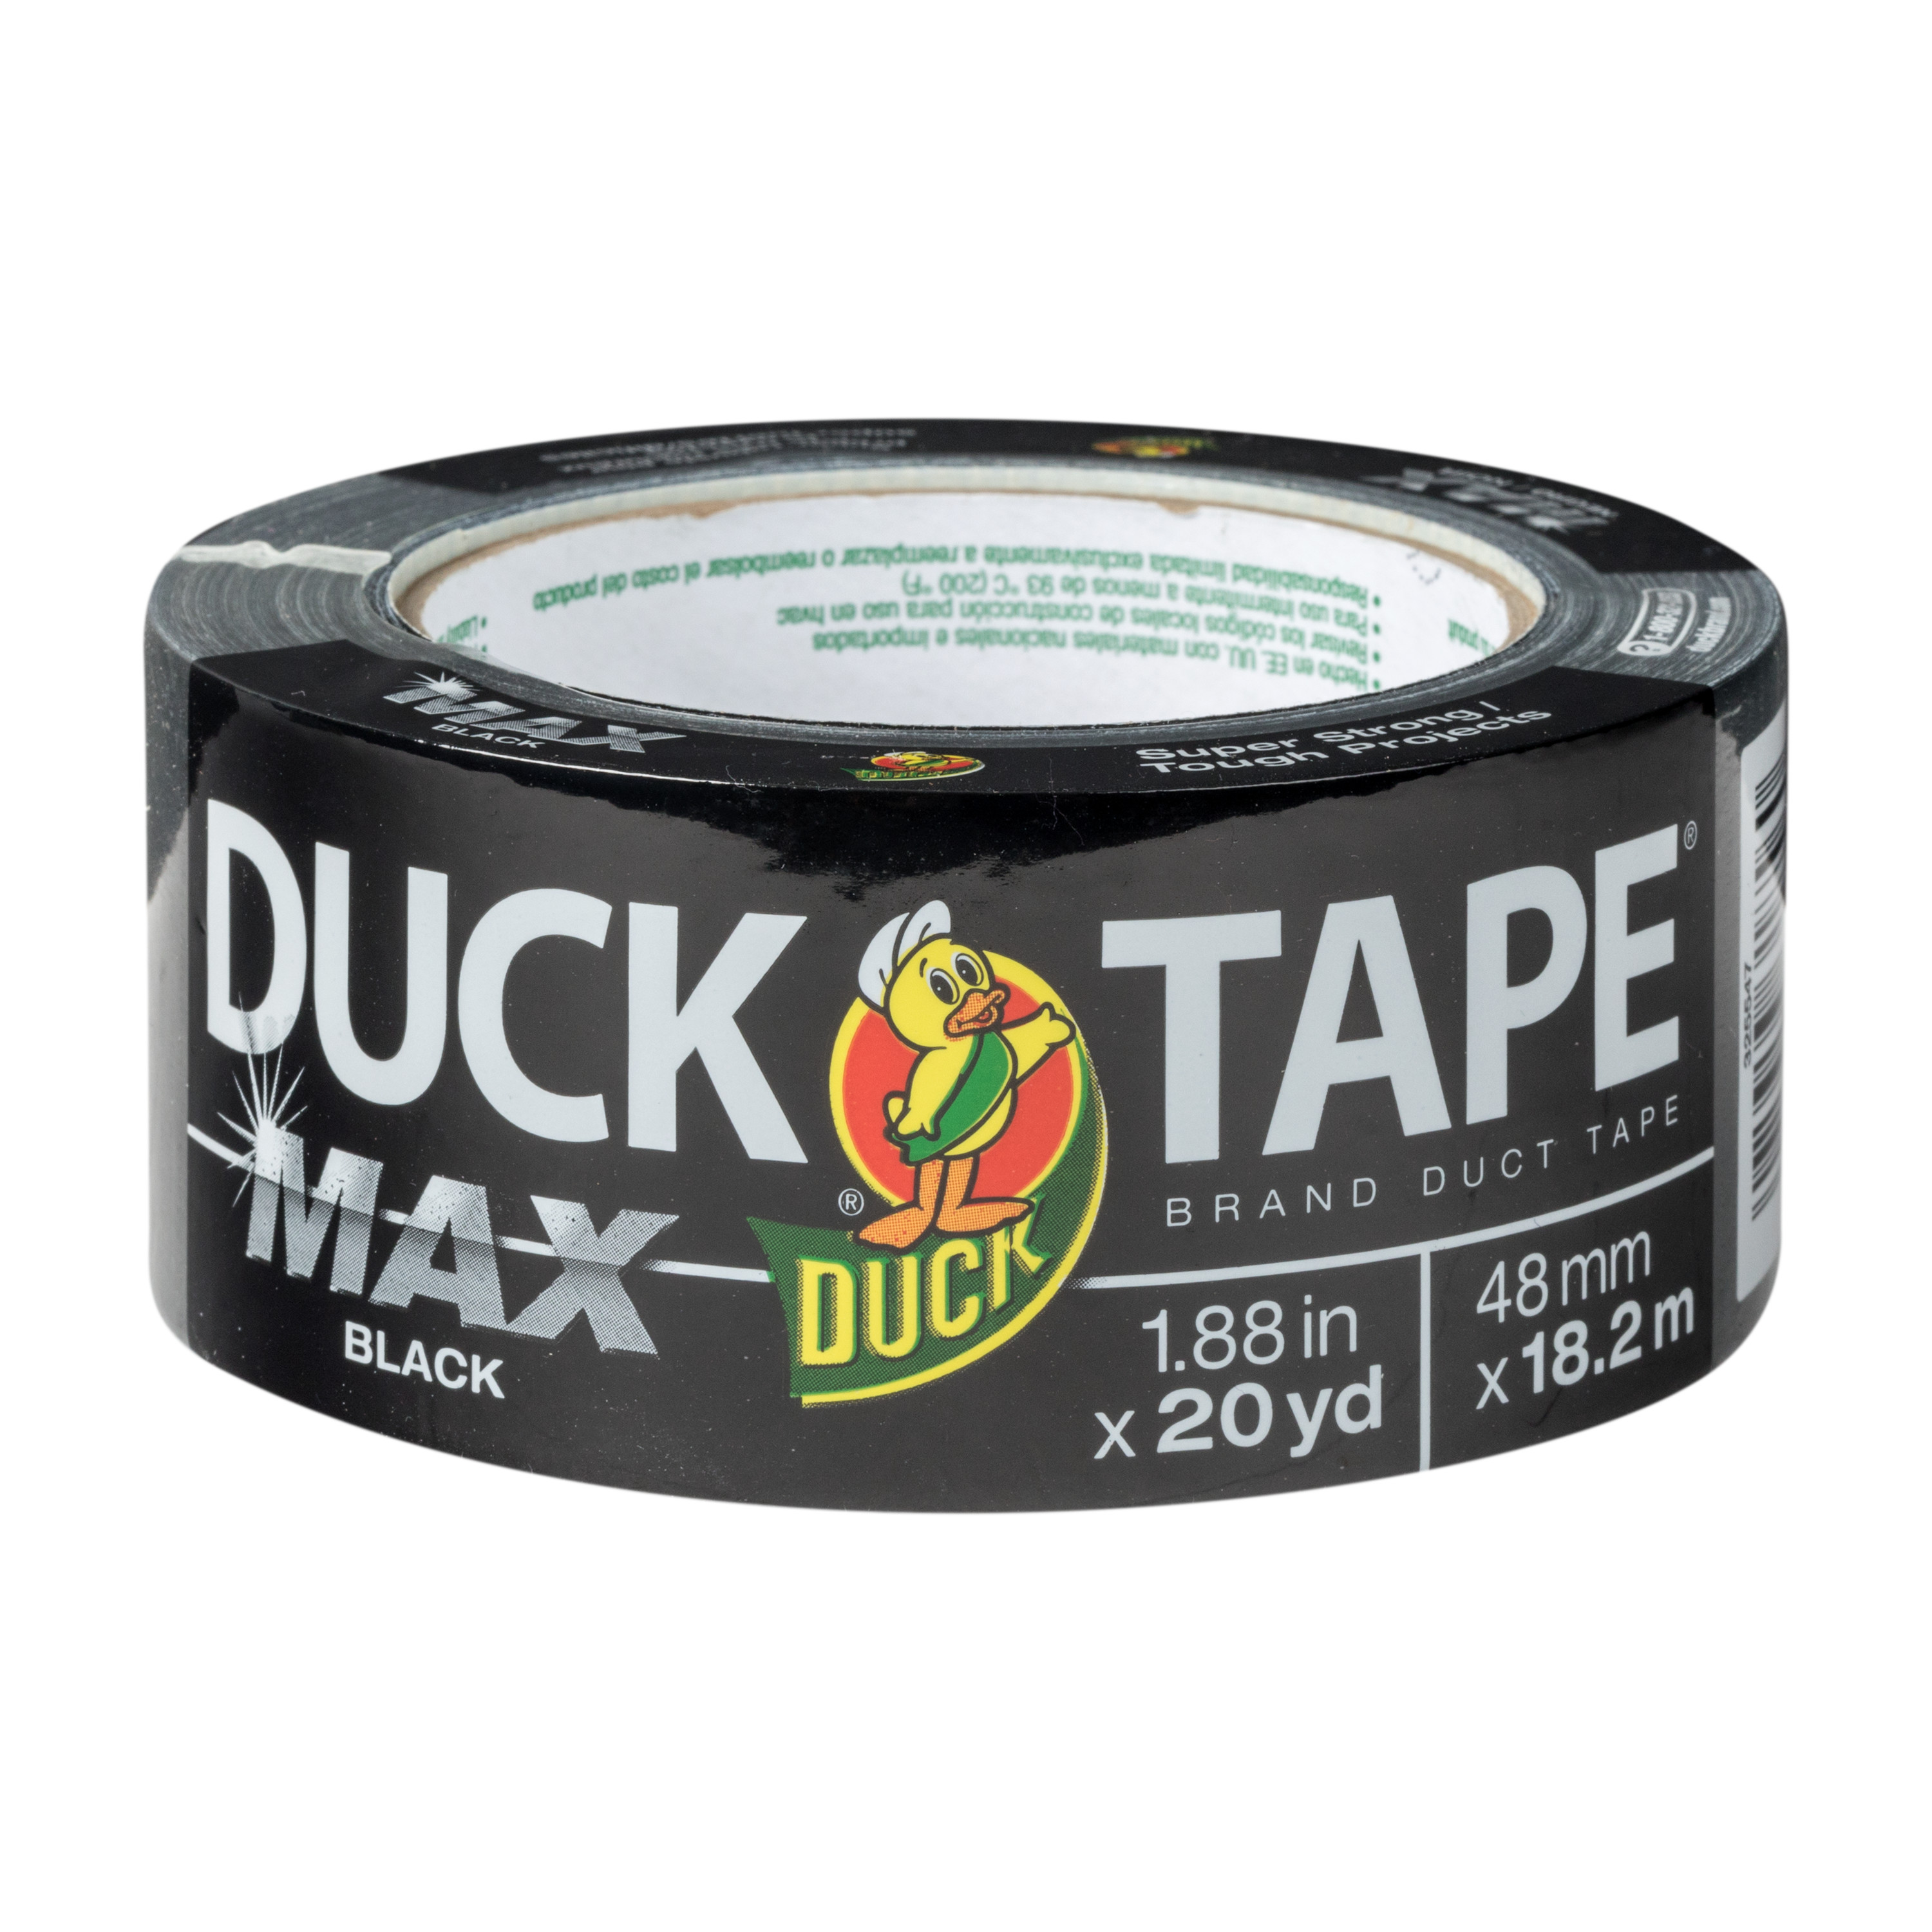 Duck Brand Max Strength 1.88 in x 20 yd Black Duct Tape Roll - image 1 of 4